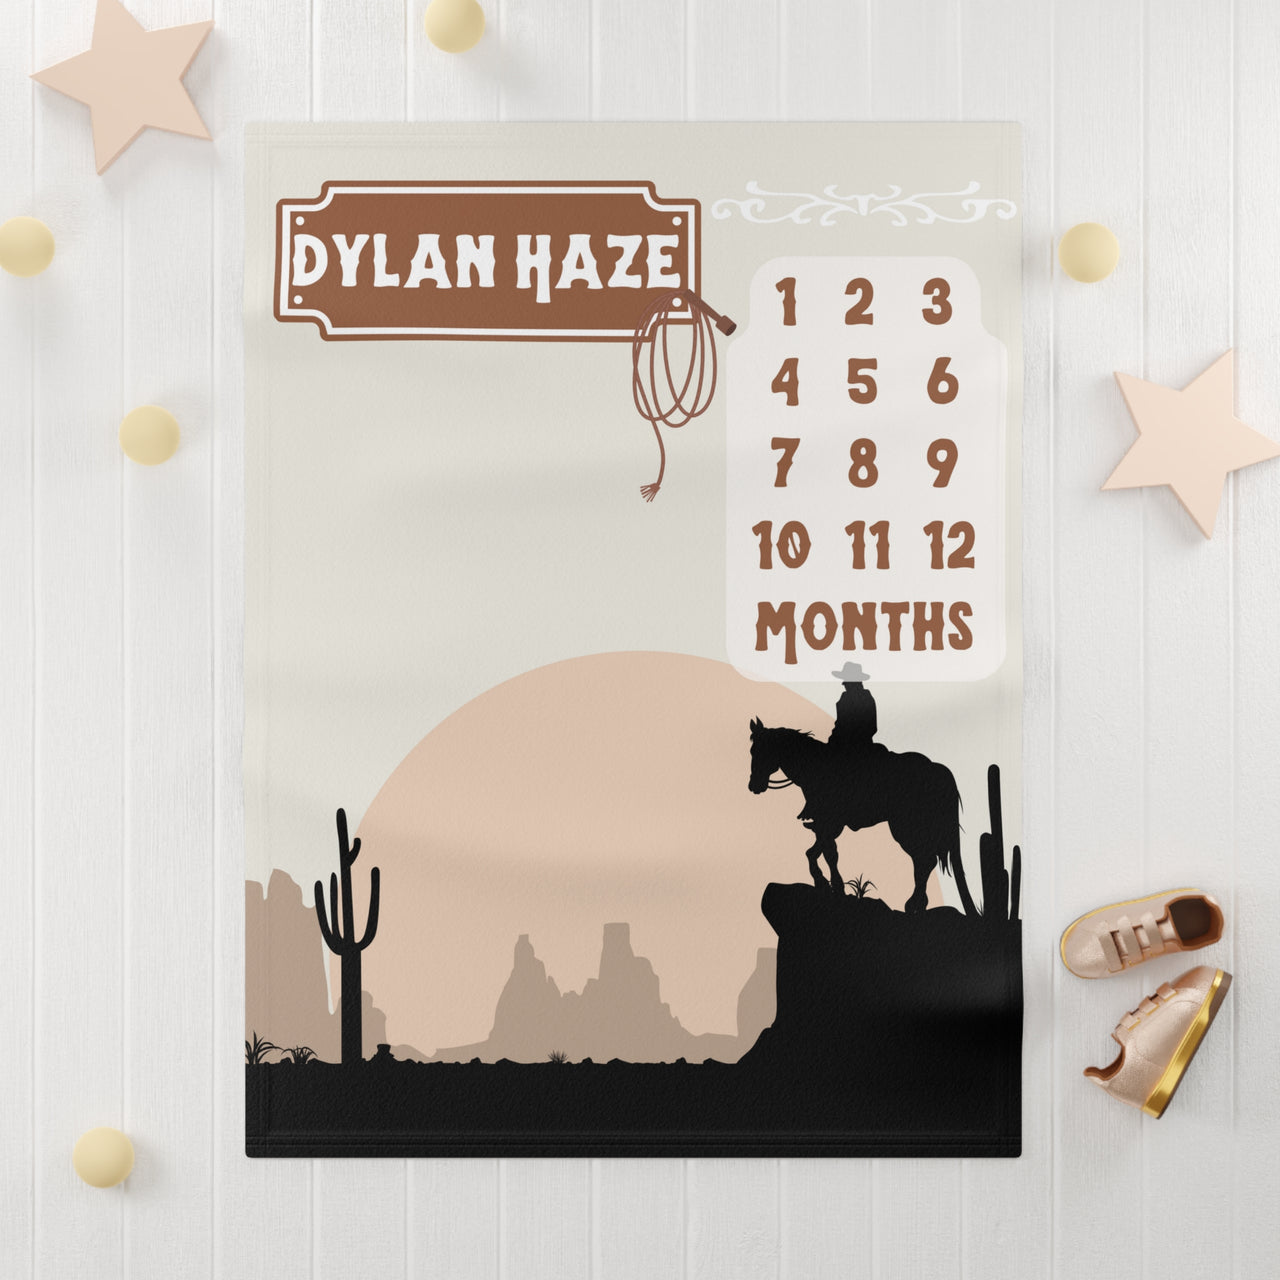 Neutral Western Soft Fleece Milestone Blanket, Monthly Growth Tracker, Personalized Baby Blanket, Baby Shower Gift, Baby Adventure